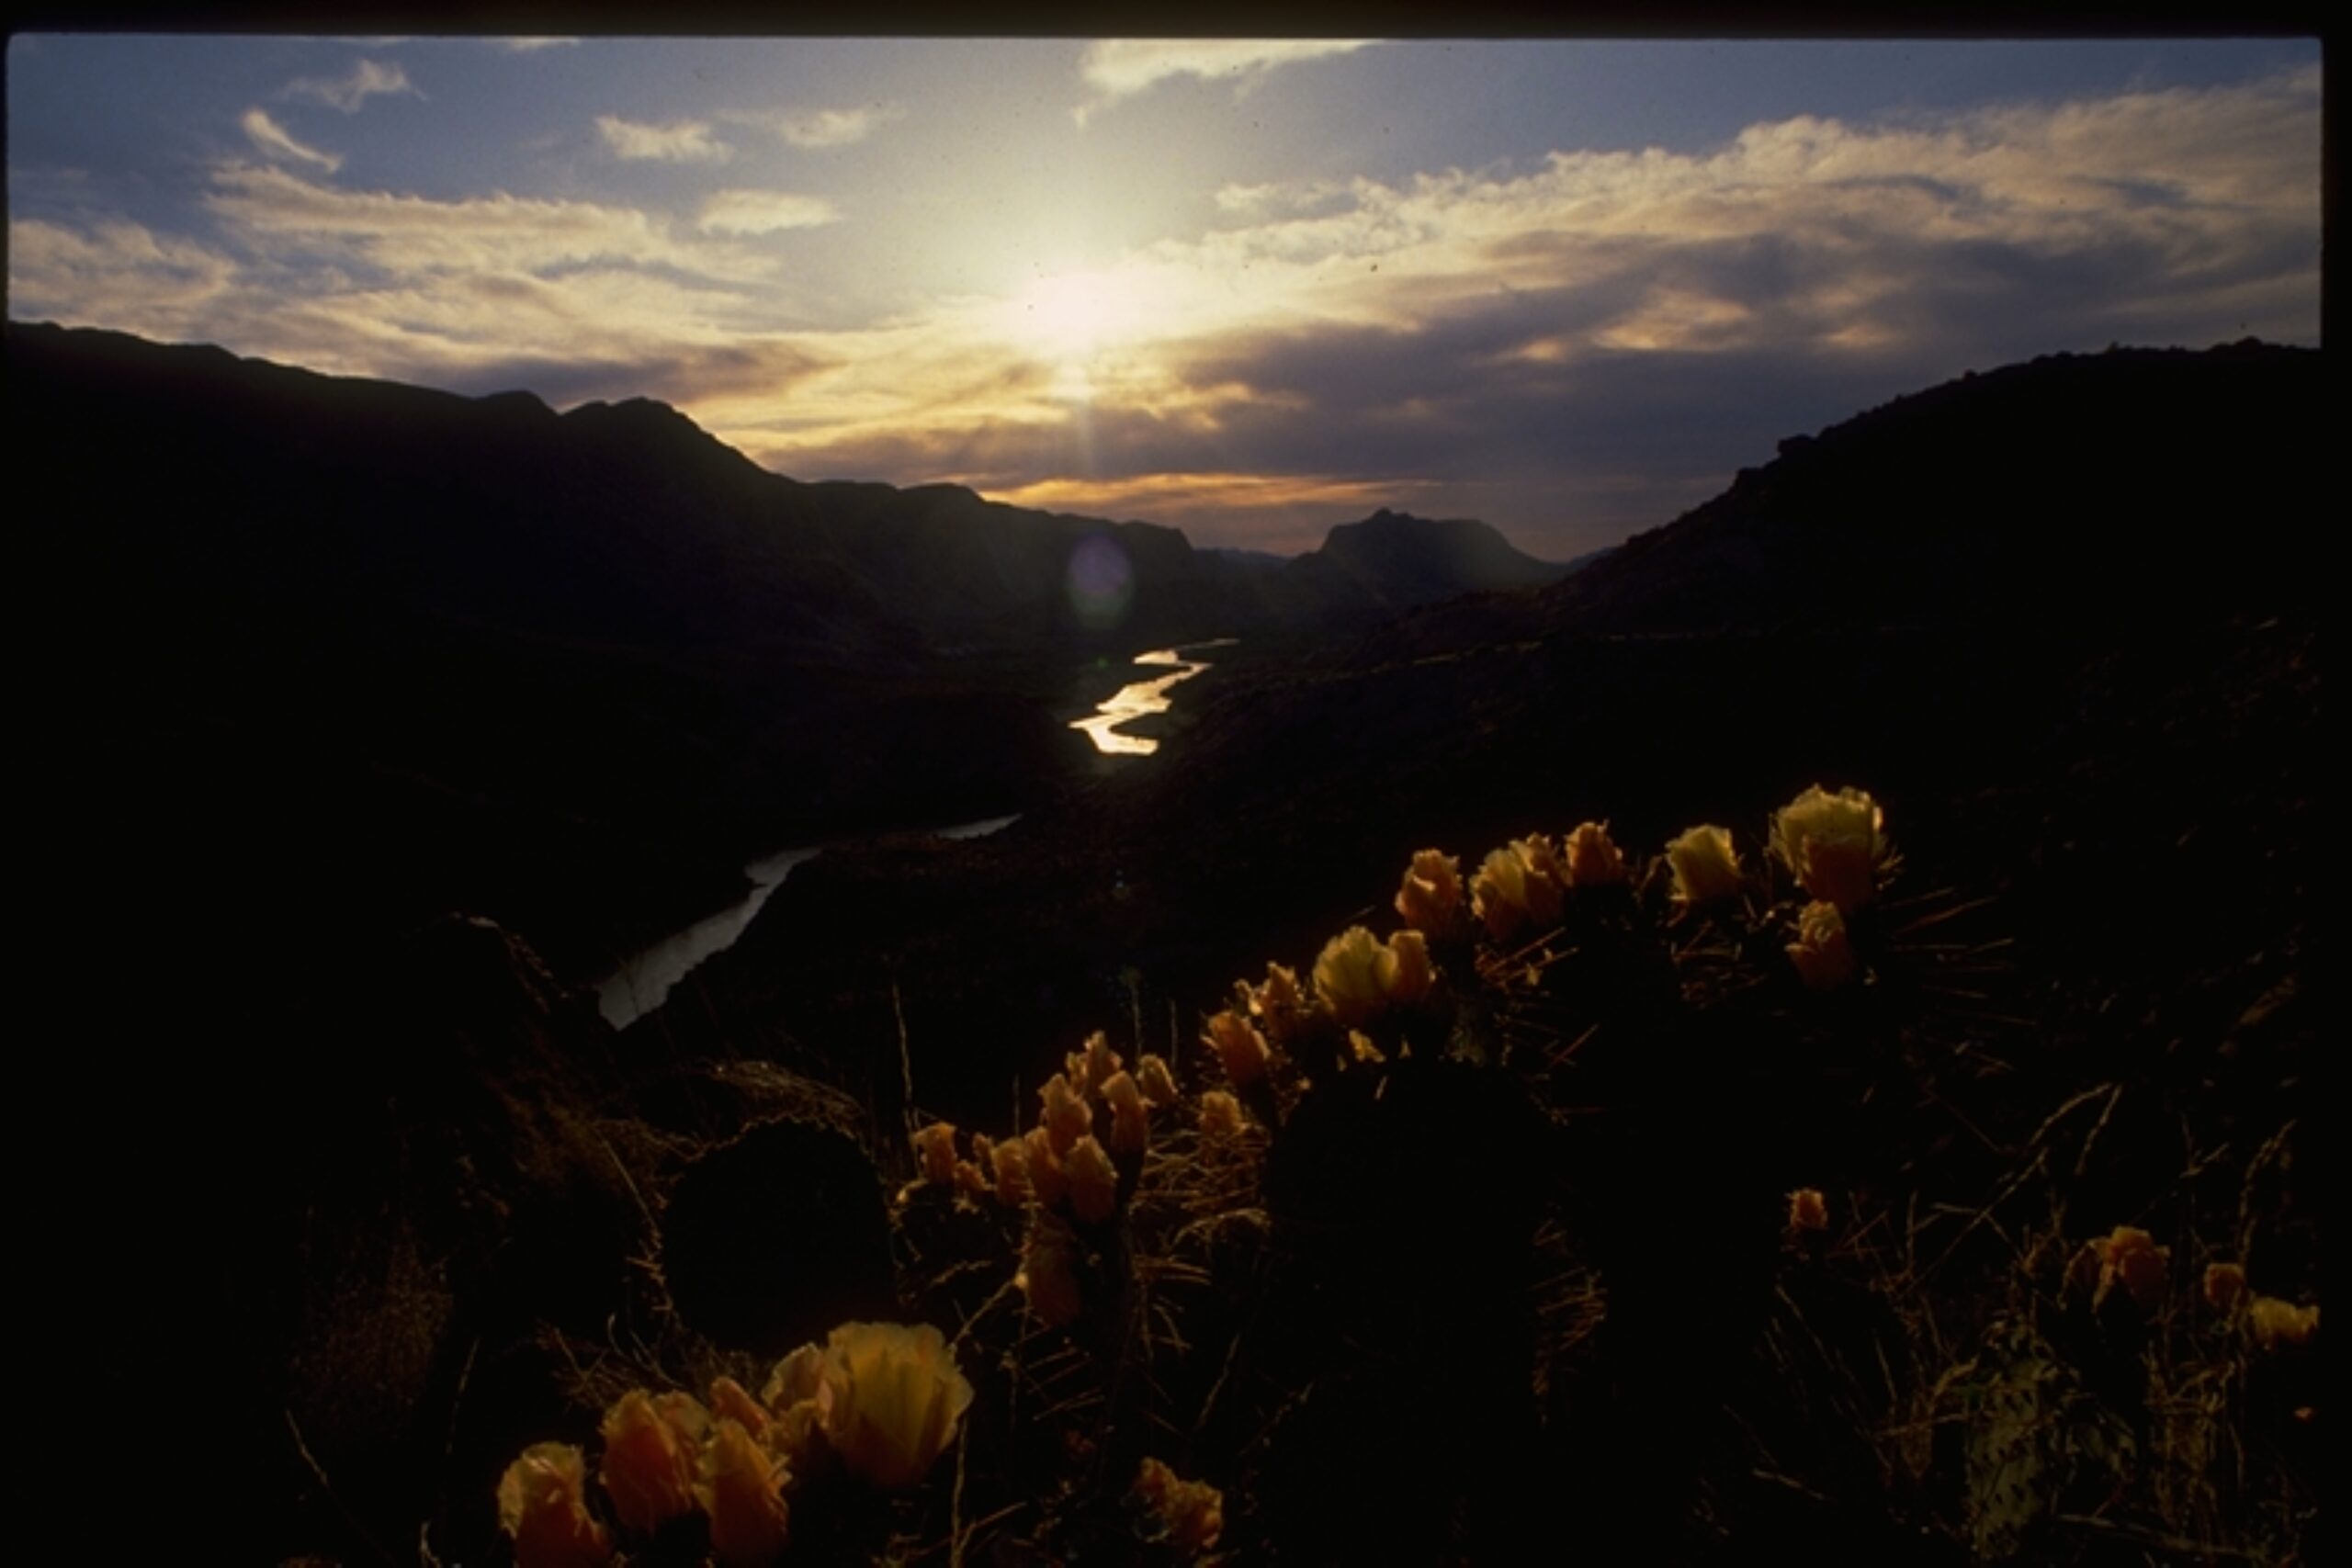 View of the Rio Grande River at sunset with blooming yellow cactus flowers in the foreground in Colorado Canyon in Big Bend Ranch State Park